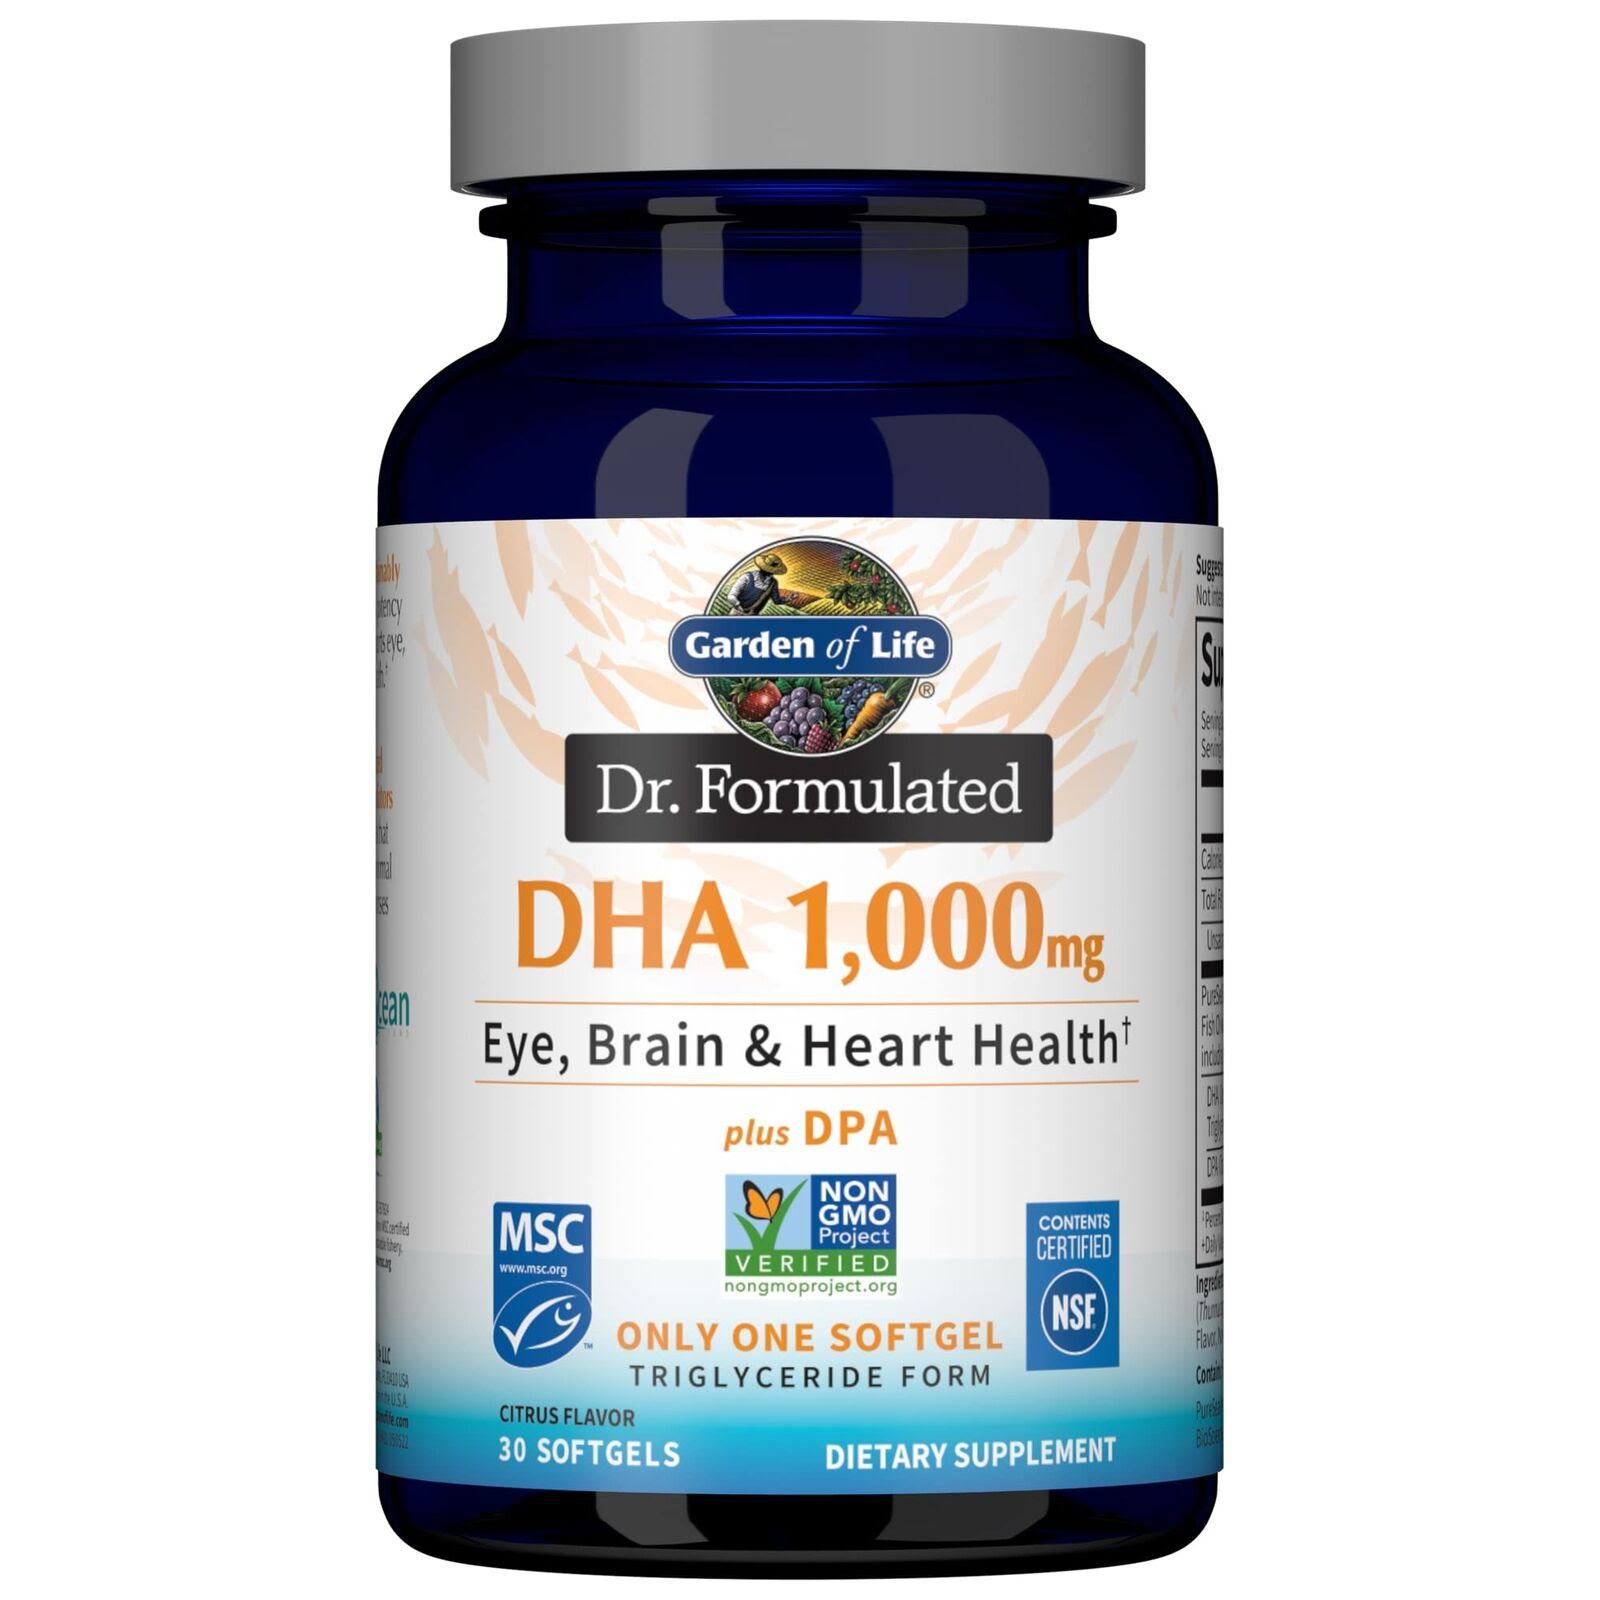 Garden of Life - Dr. Formulated DHA 1,000 mg - 30 Softgels